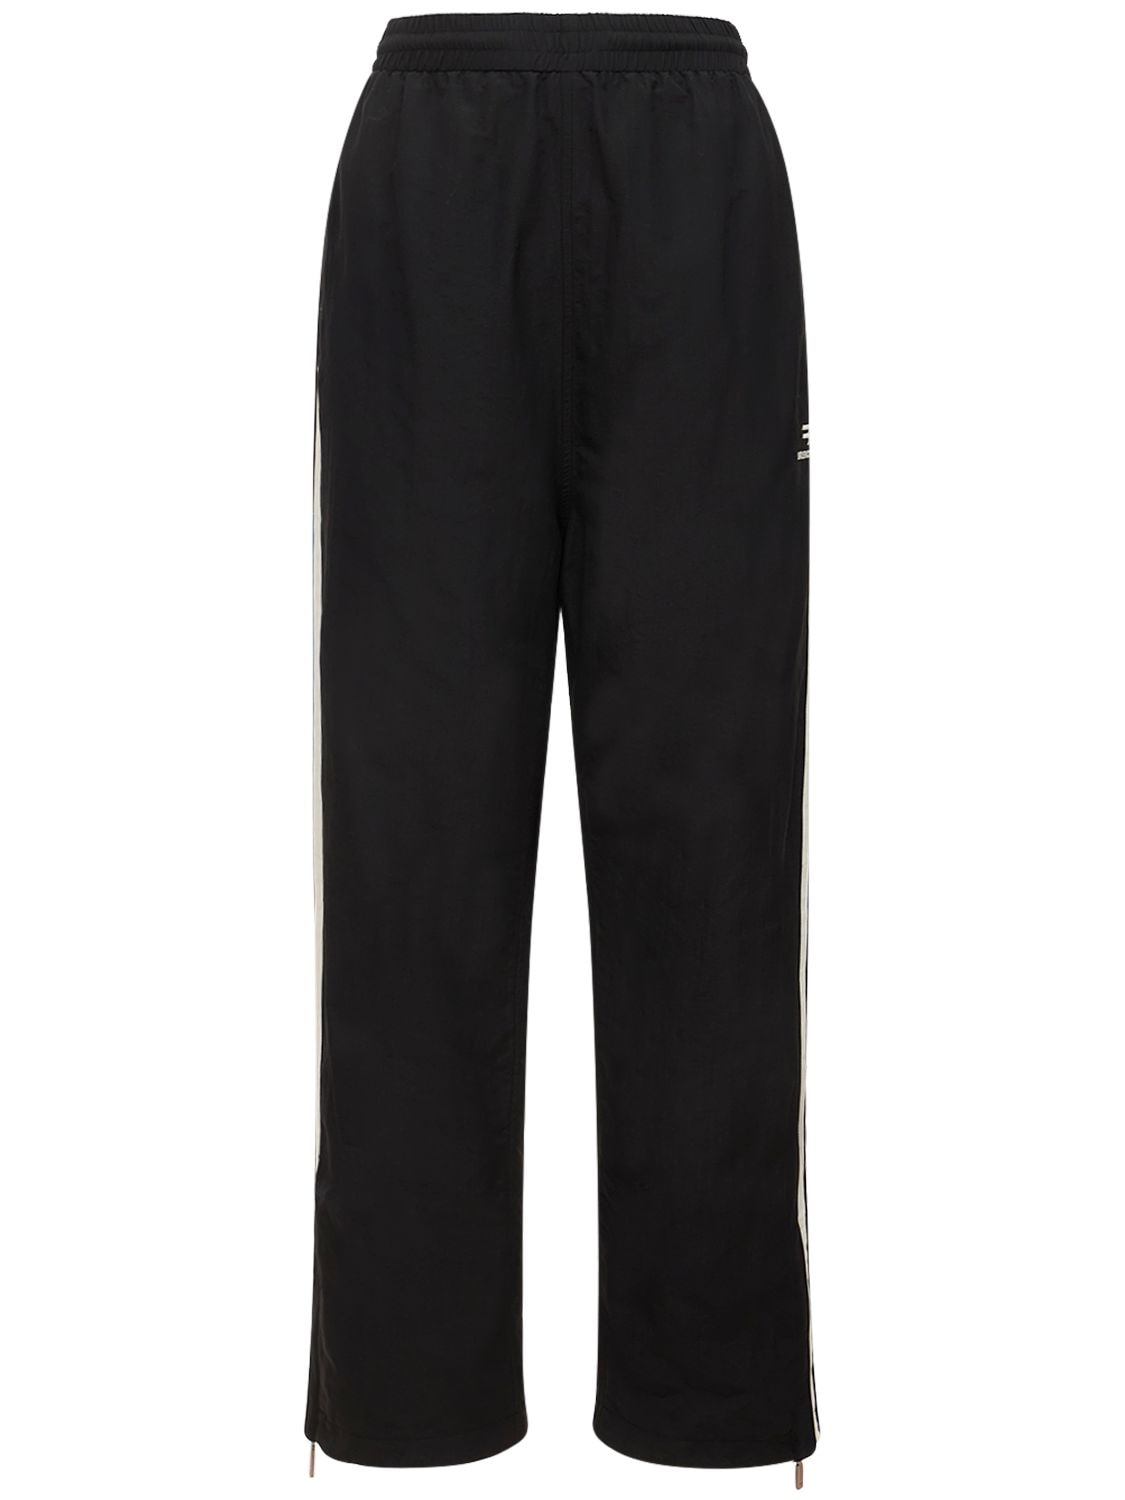 Image of Tracksuit Jersey Pants